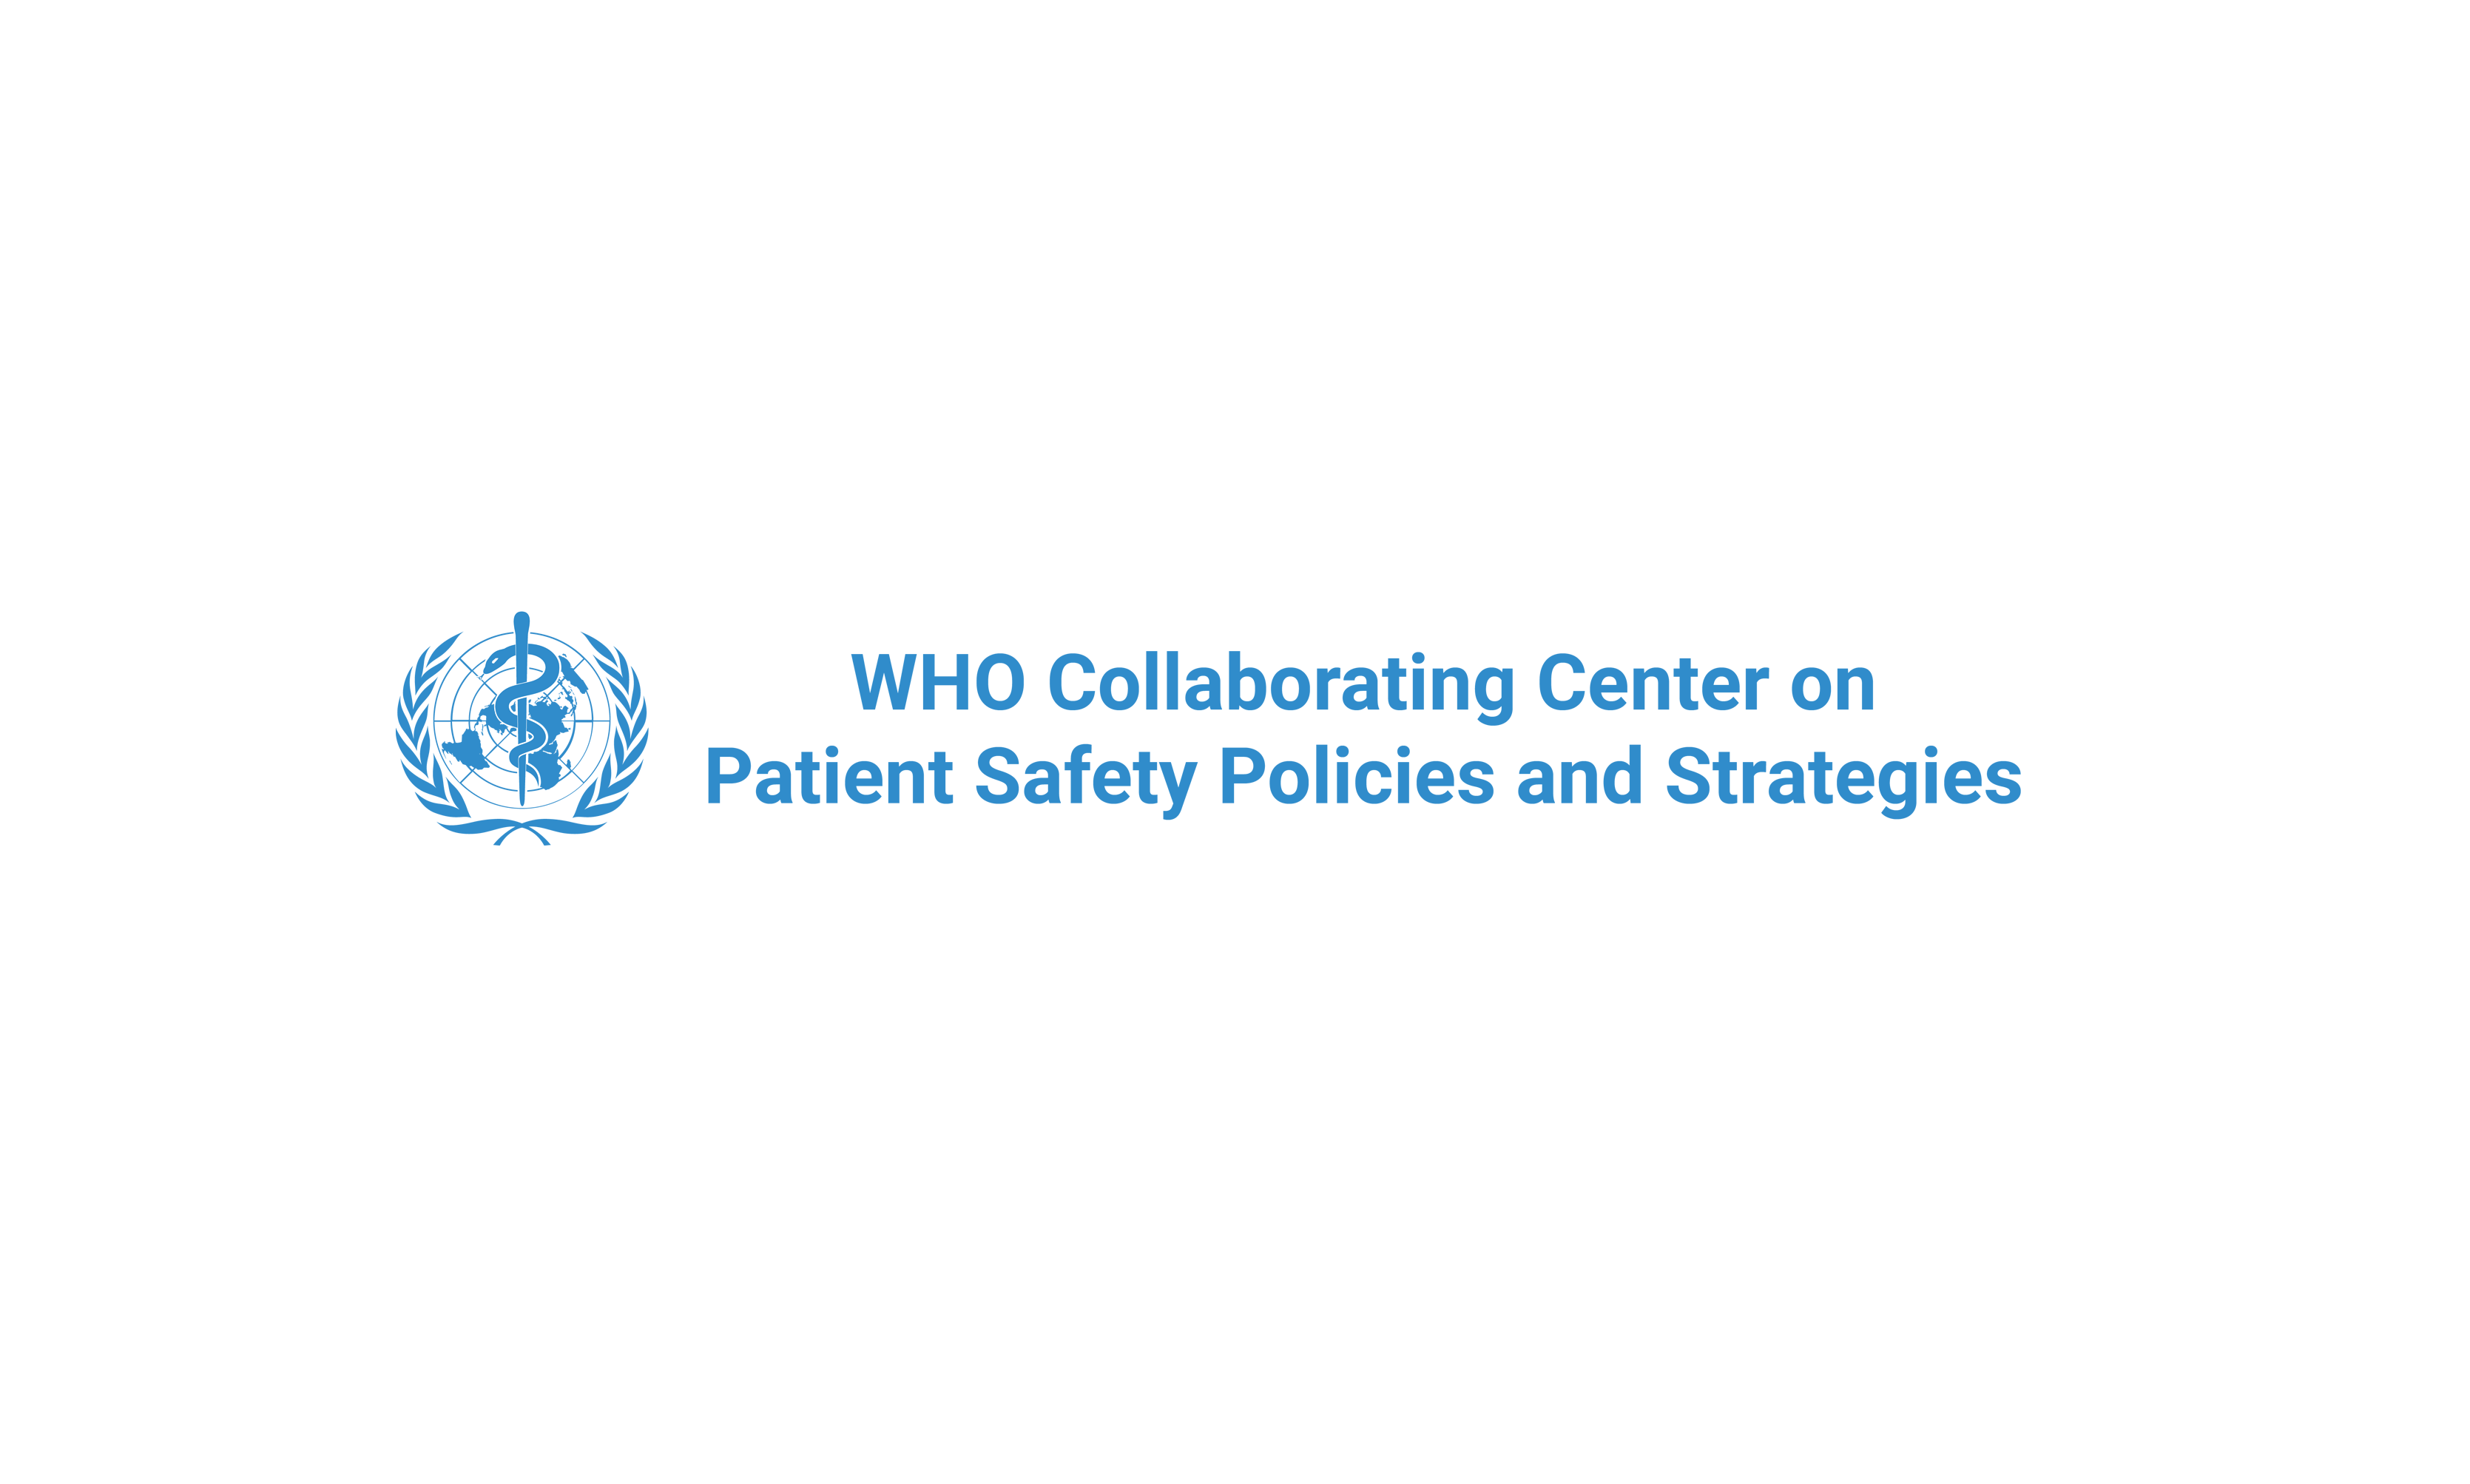 WHO Collaborating Center On Patient Safety Policies And Strategies 